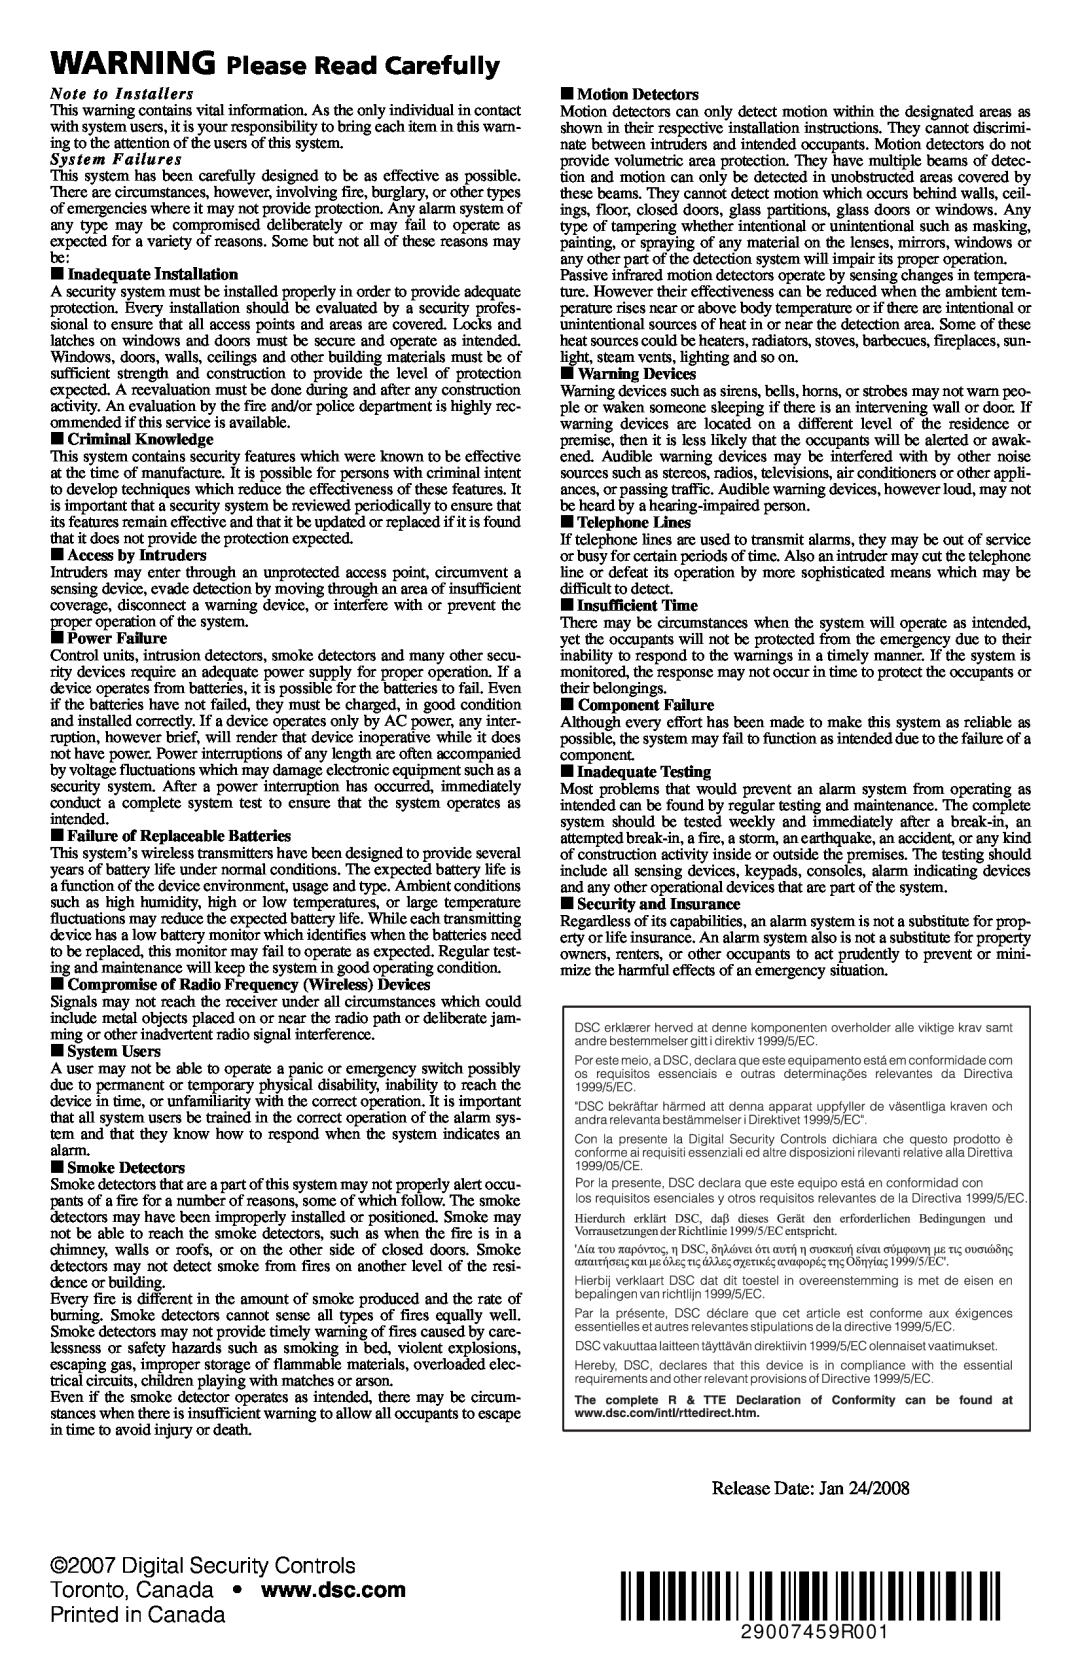 ADT Security Services SCW9045-433 manual WARNING Please Read Carefully, Inadequate Installation, Release Date Jan 24/2008 